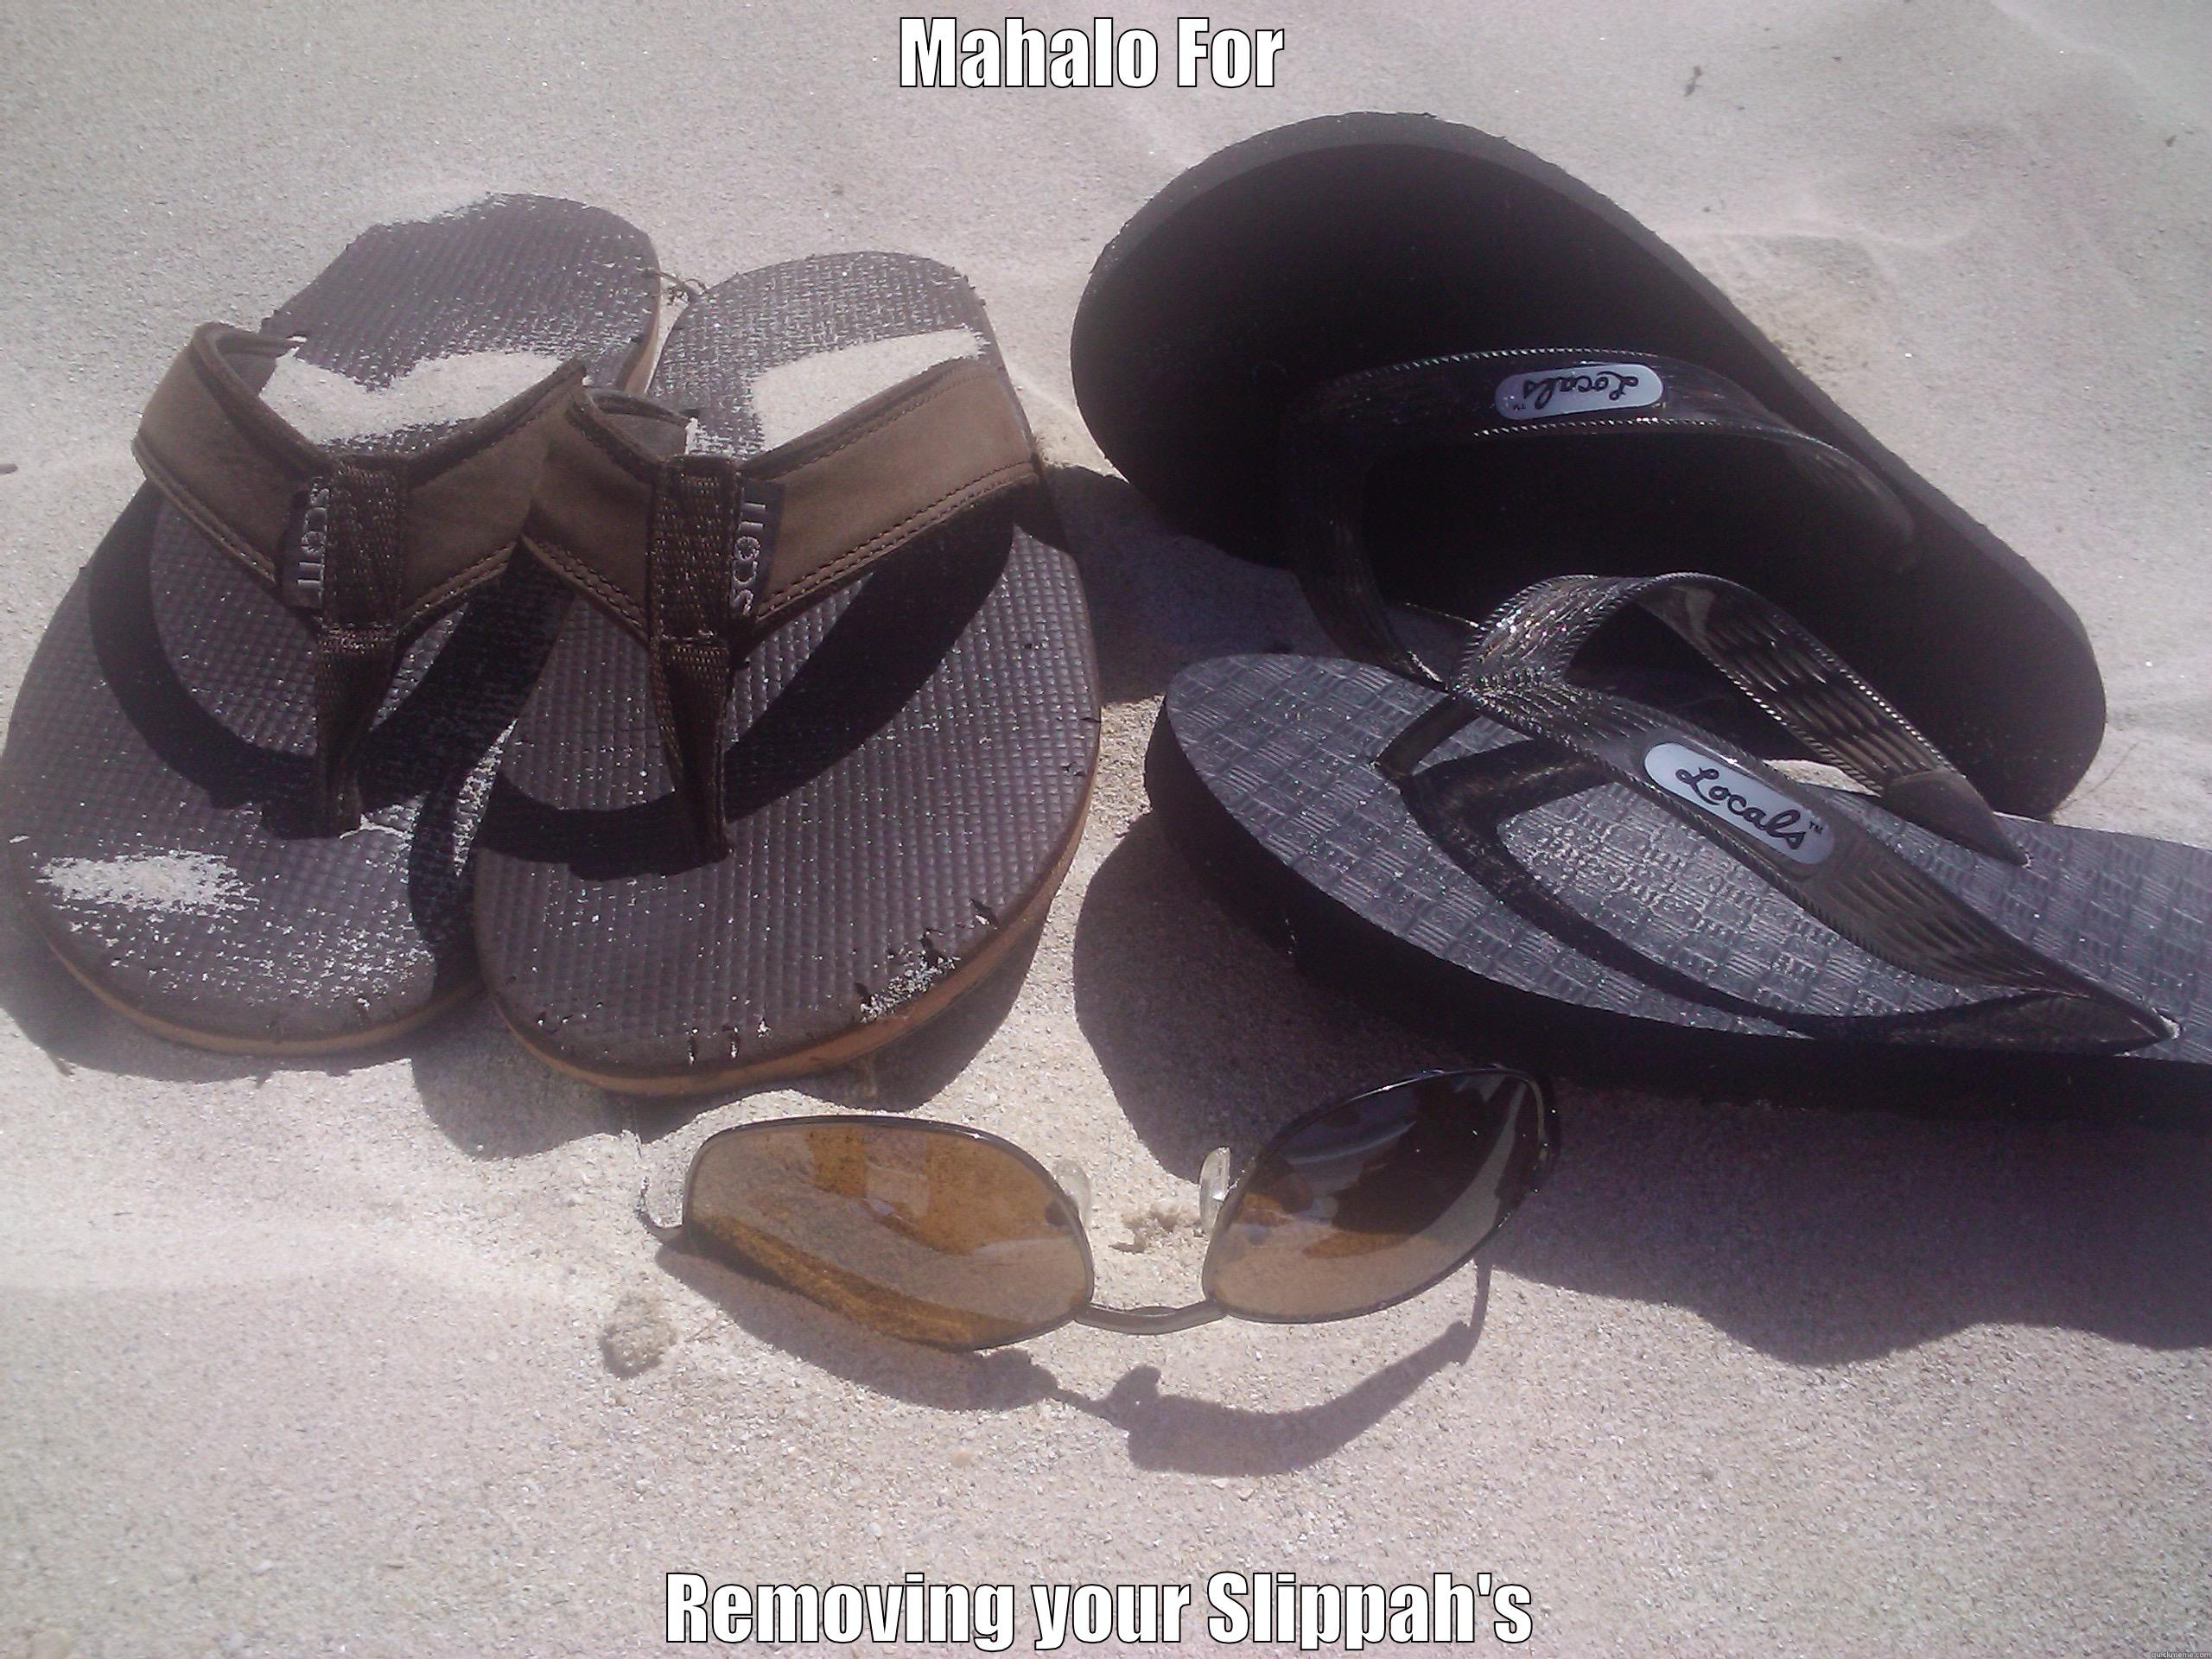 Mahalo for  - MAHALO FOR  REMOVING YOUR SLIPPAH'S Success Kid